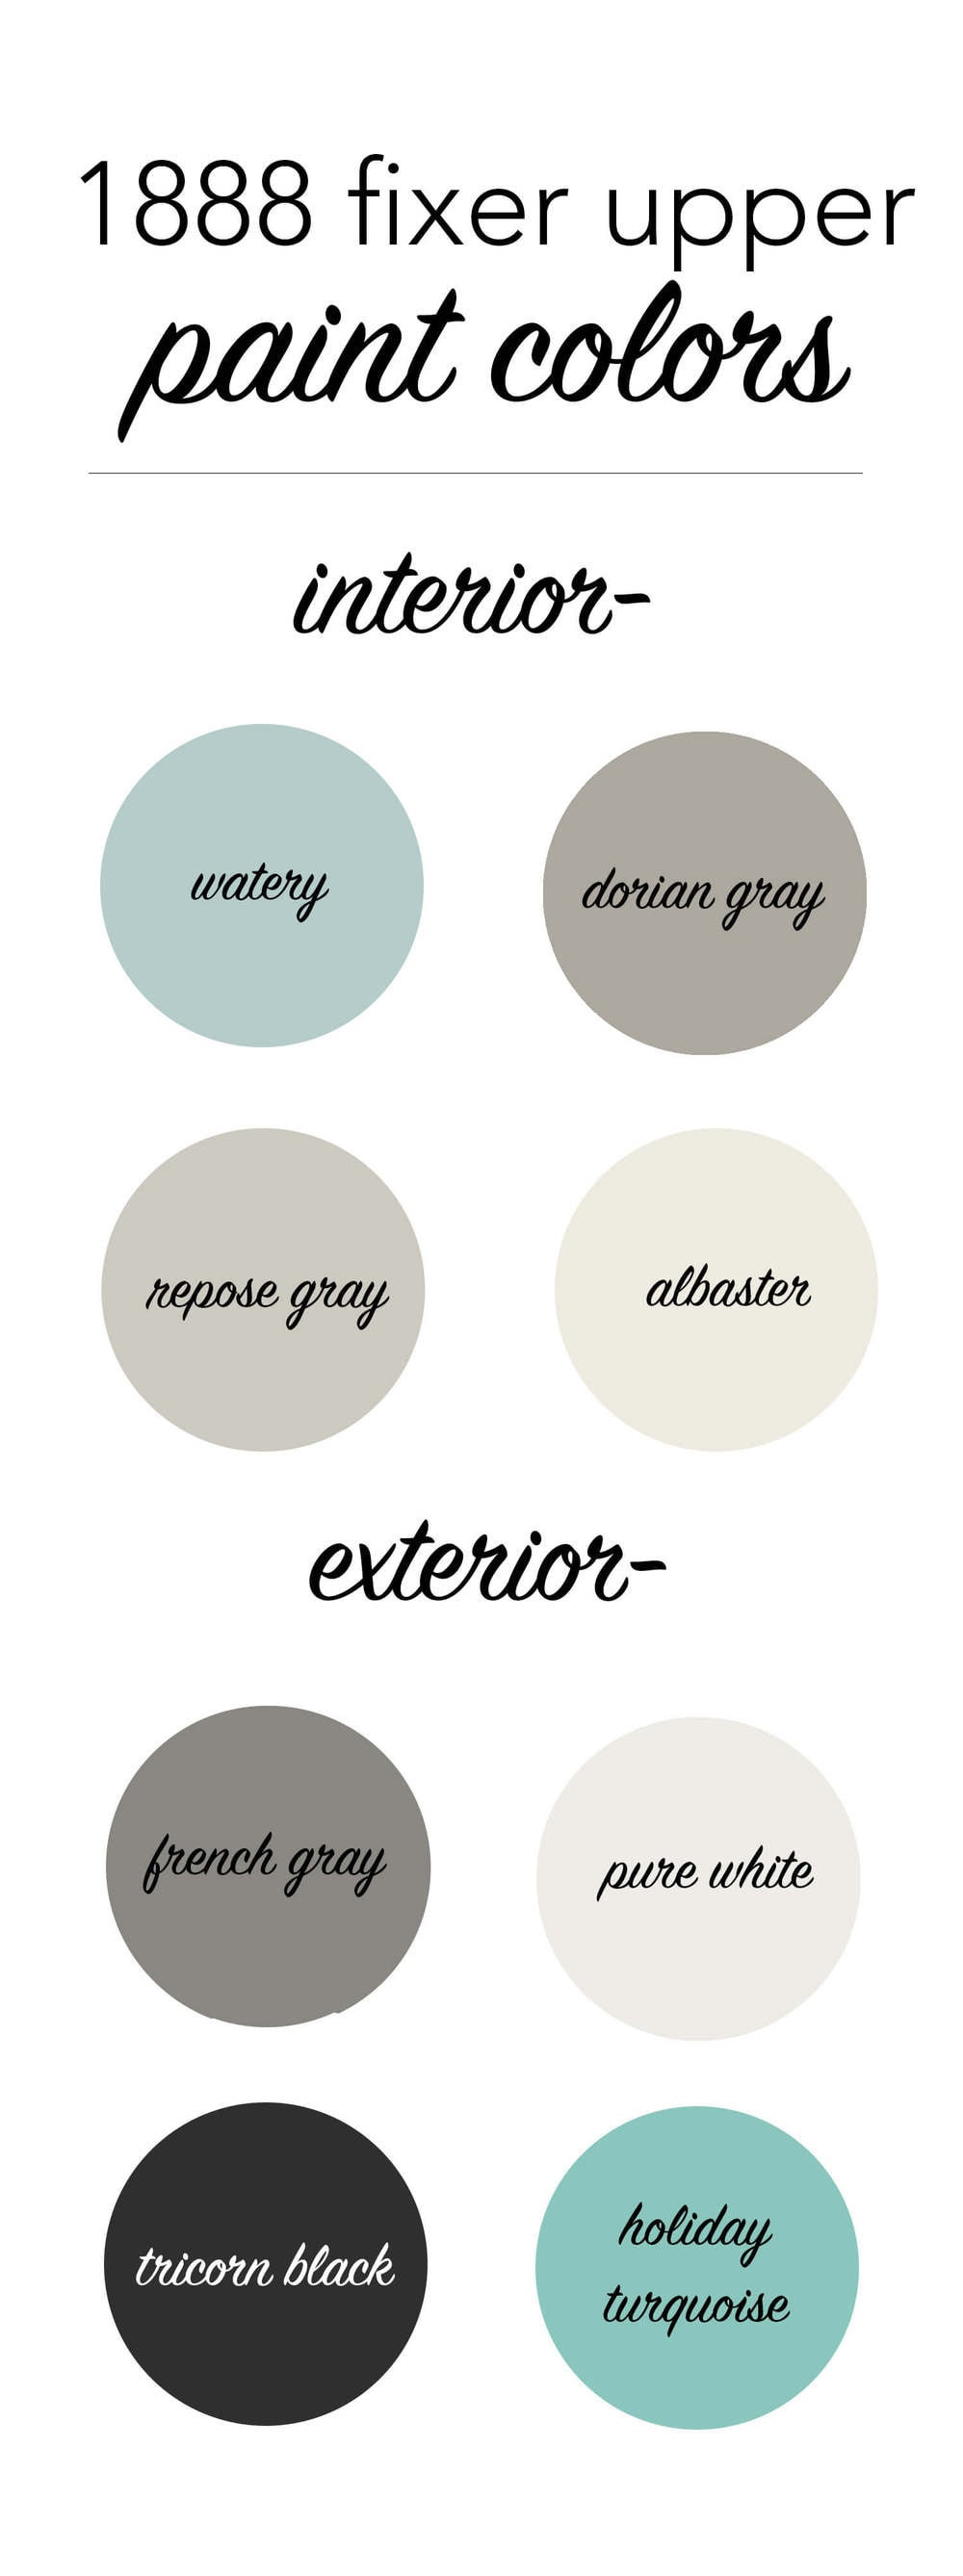 Best ideas about Fixer Upper Paint Colors
. Save or Pin An Update on Our 1888 Fixer Upper Paint Colors I Heart Now.